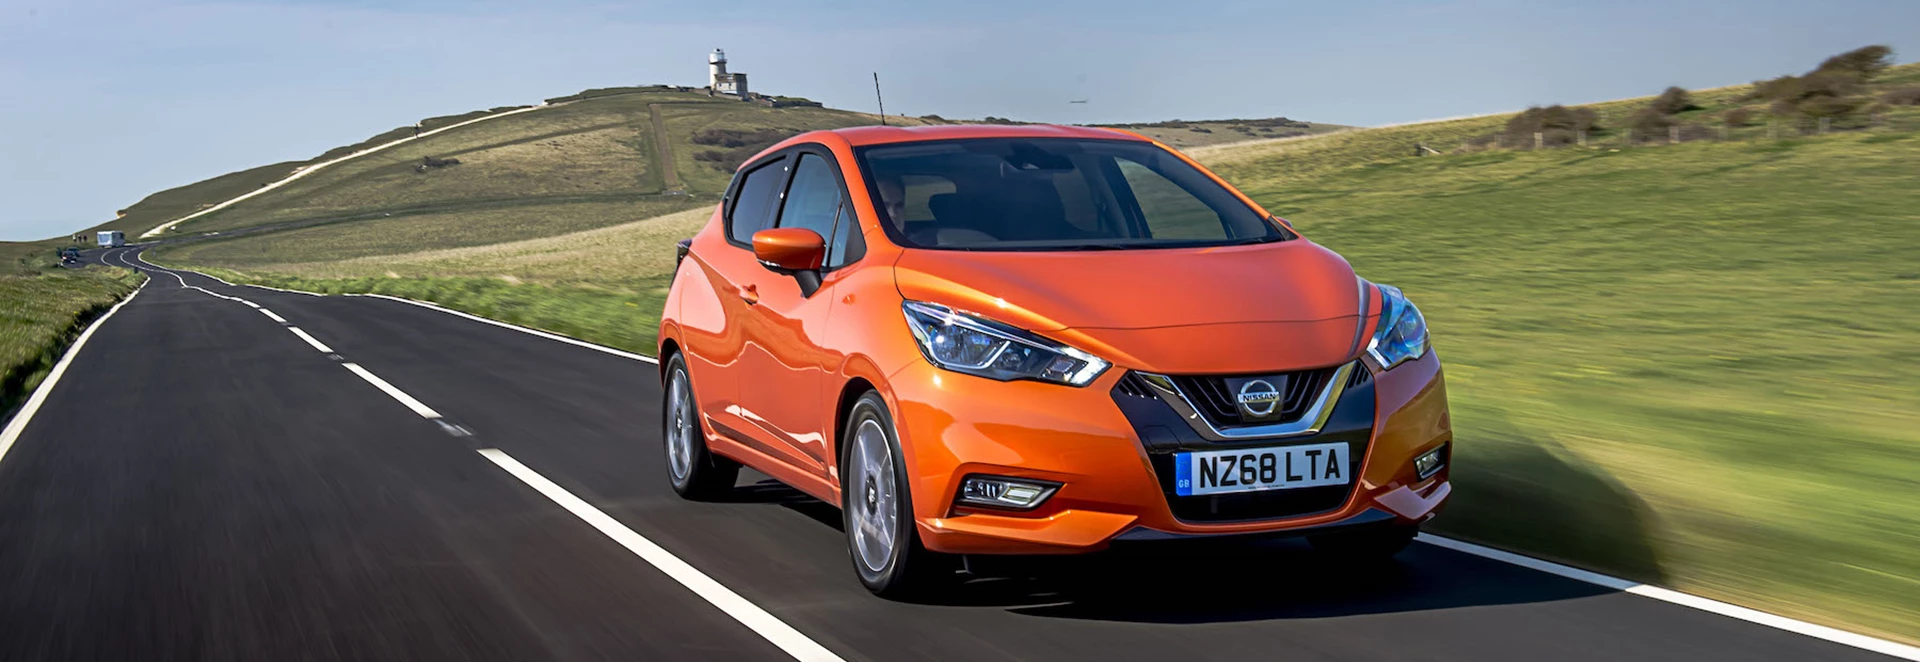 Nissan is lending NHS workers cars for free during the coronavirus pandemic 